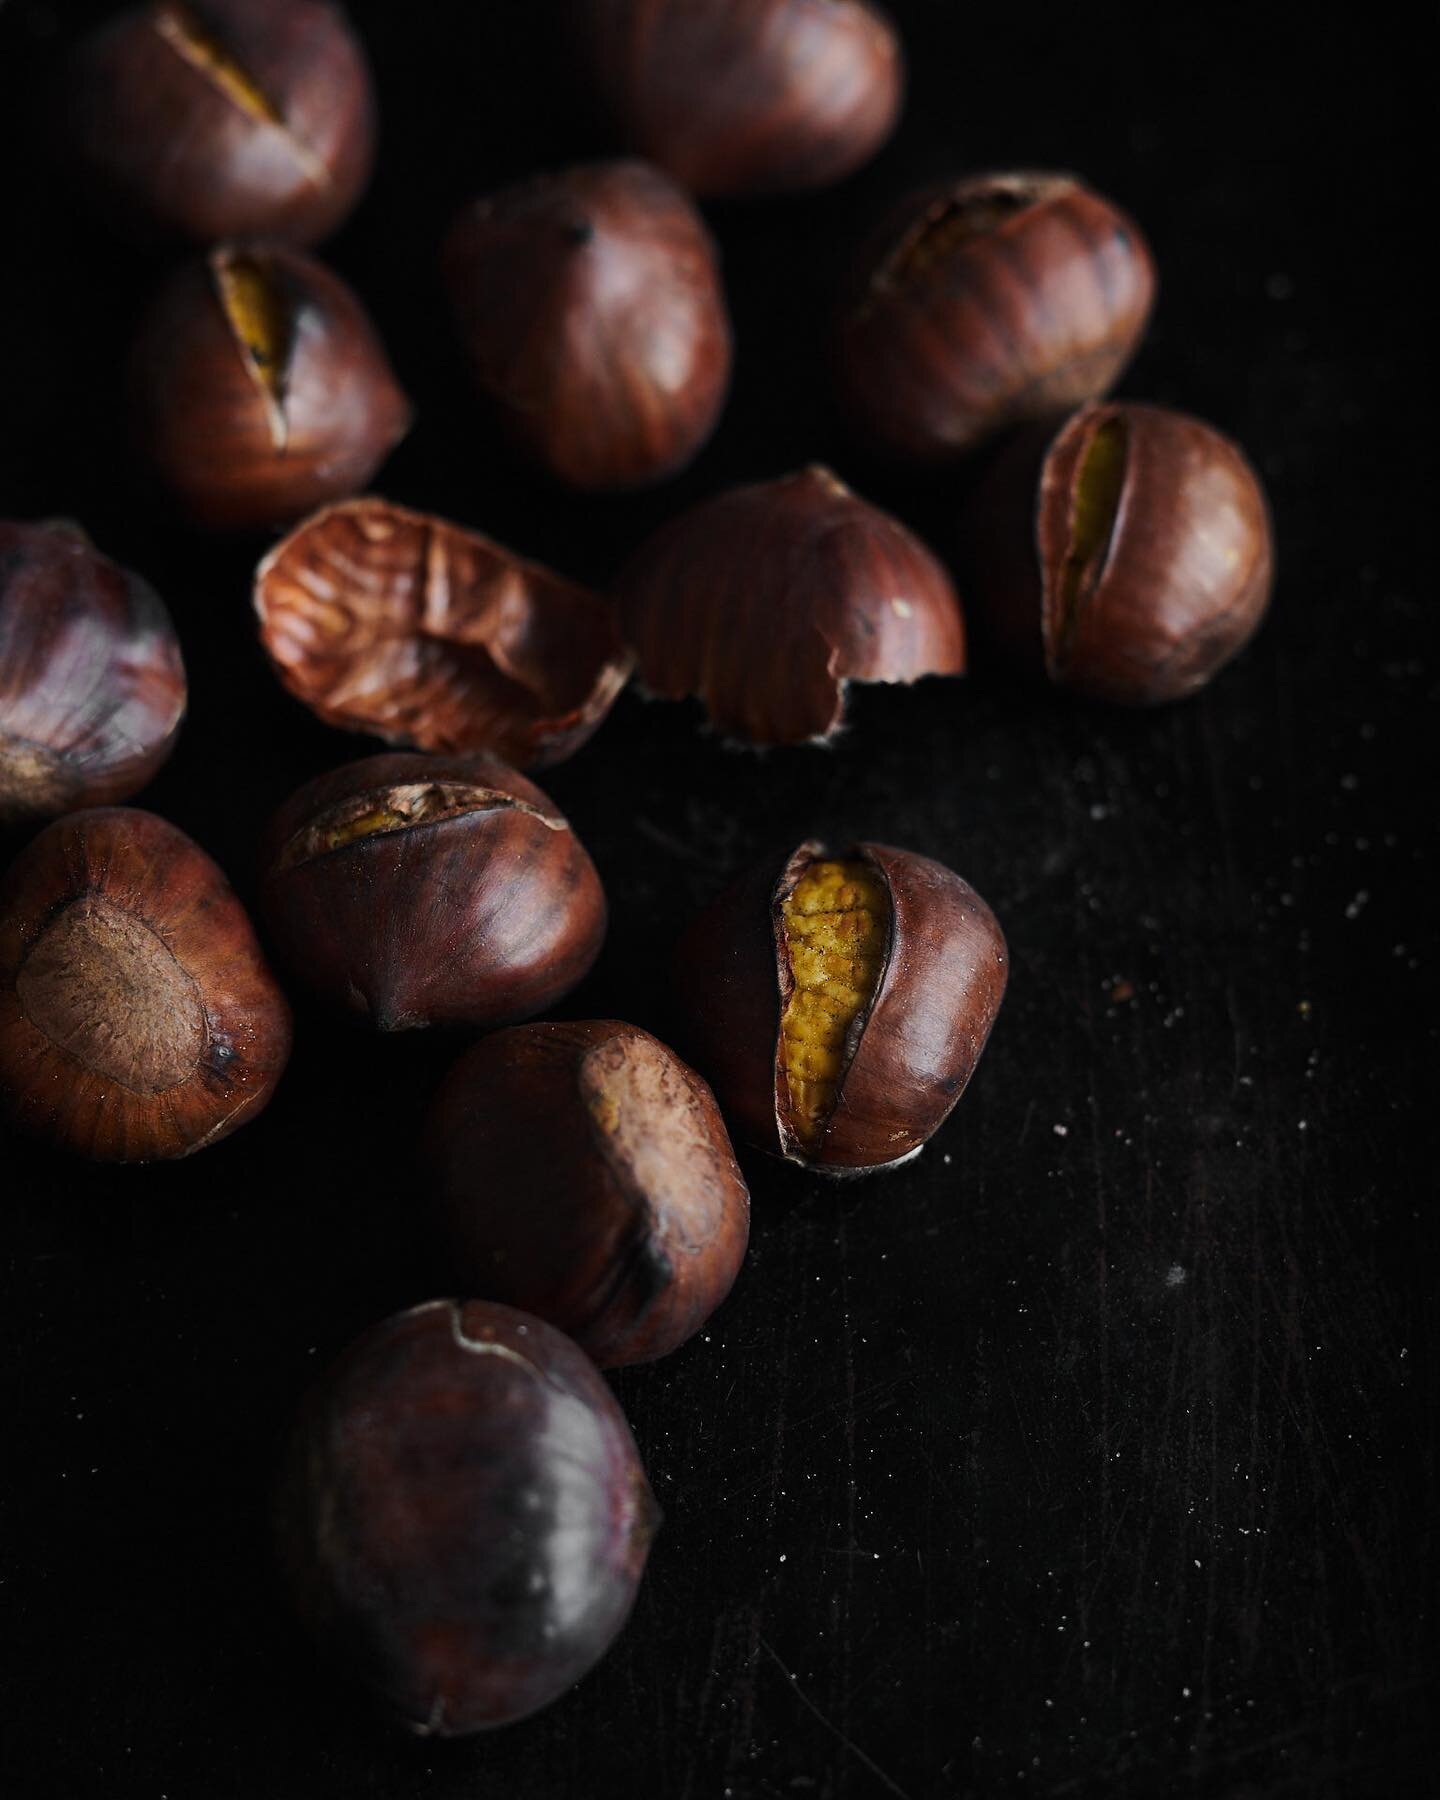 One of the best things about winter - chestnuts!! I love them hot straight out of the shell but saved some of these to top my cauliflower + blue cheese soup. Yum!